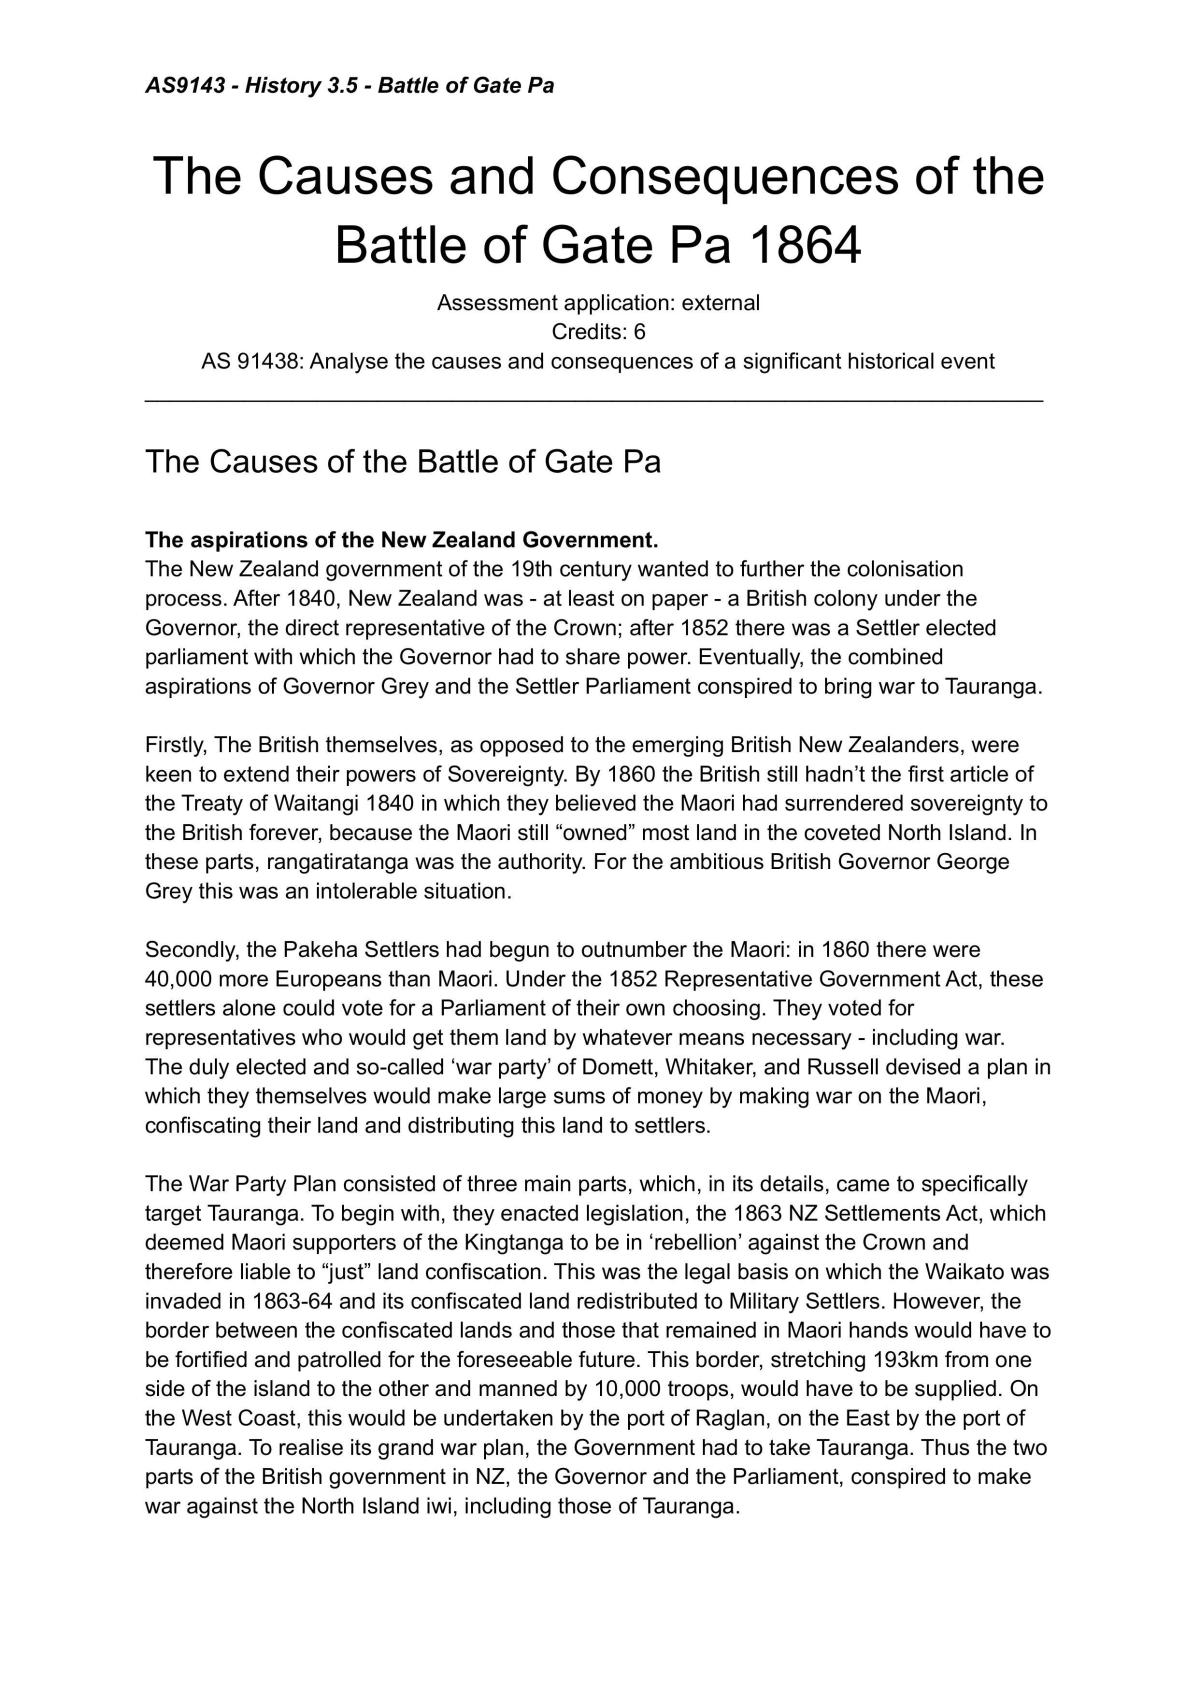 History 3.5 External (Causes and Consequences): Battle of Gate Pa 1864 - Page 1